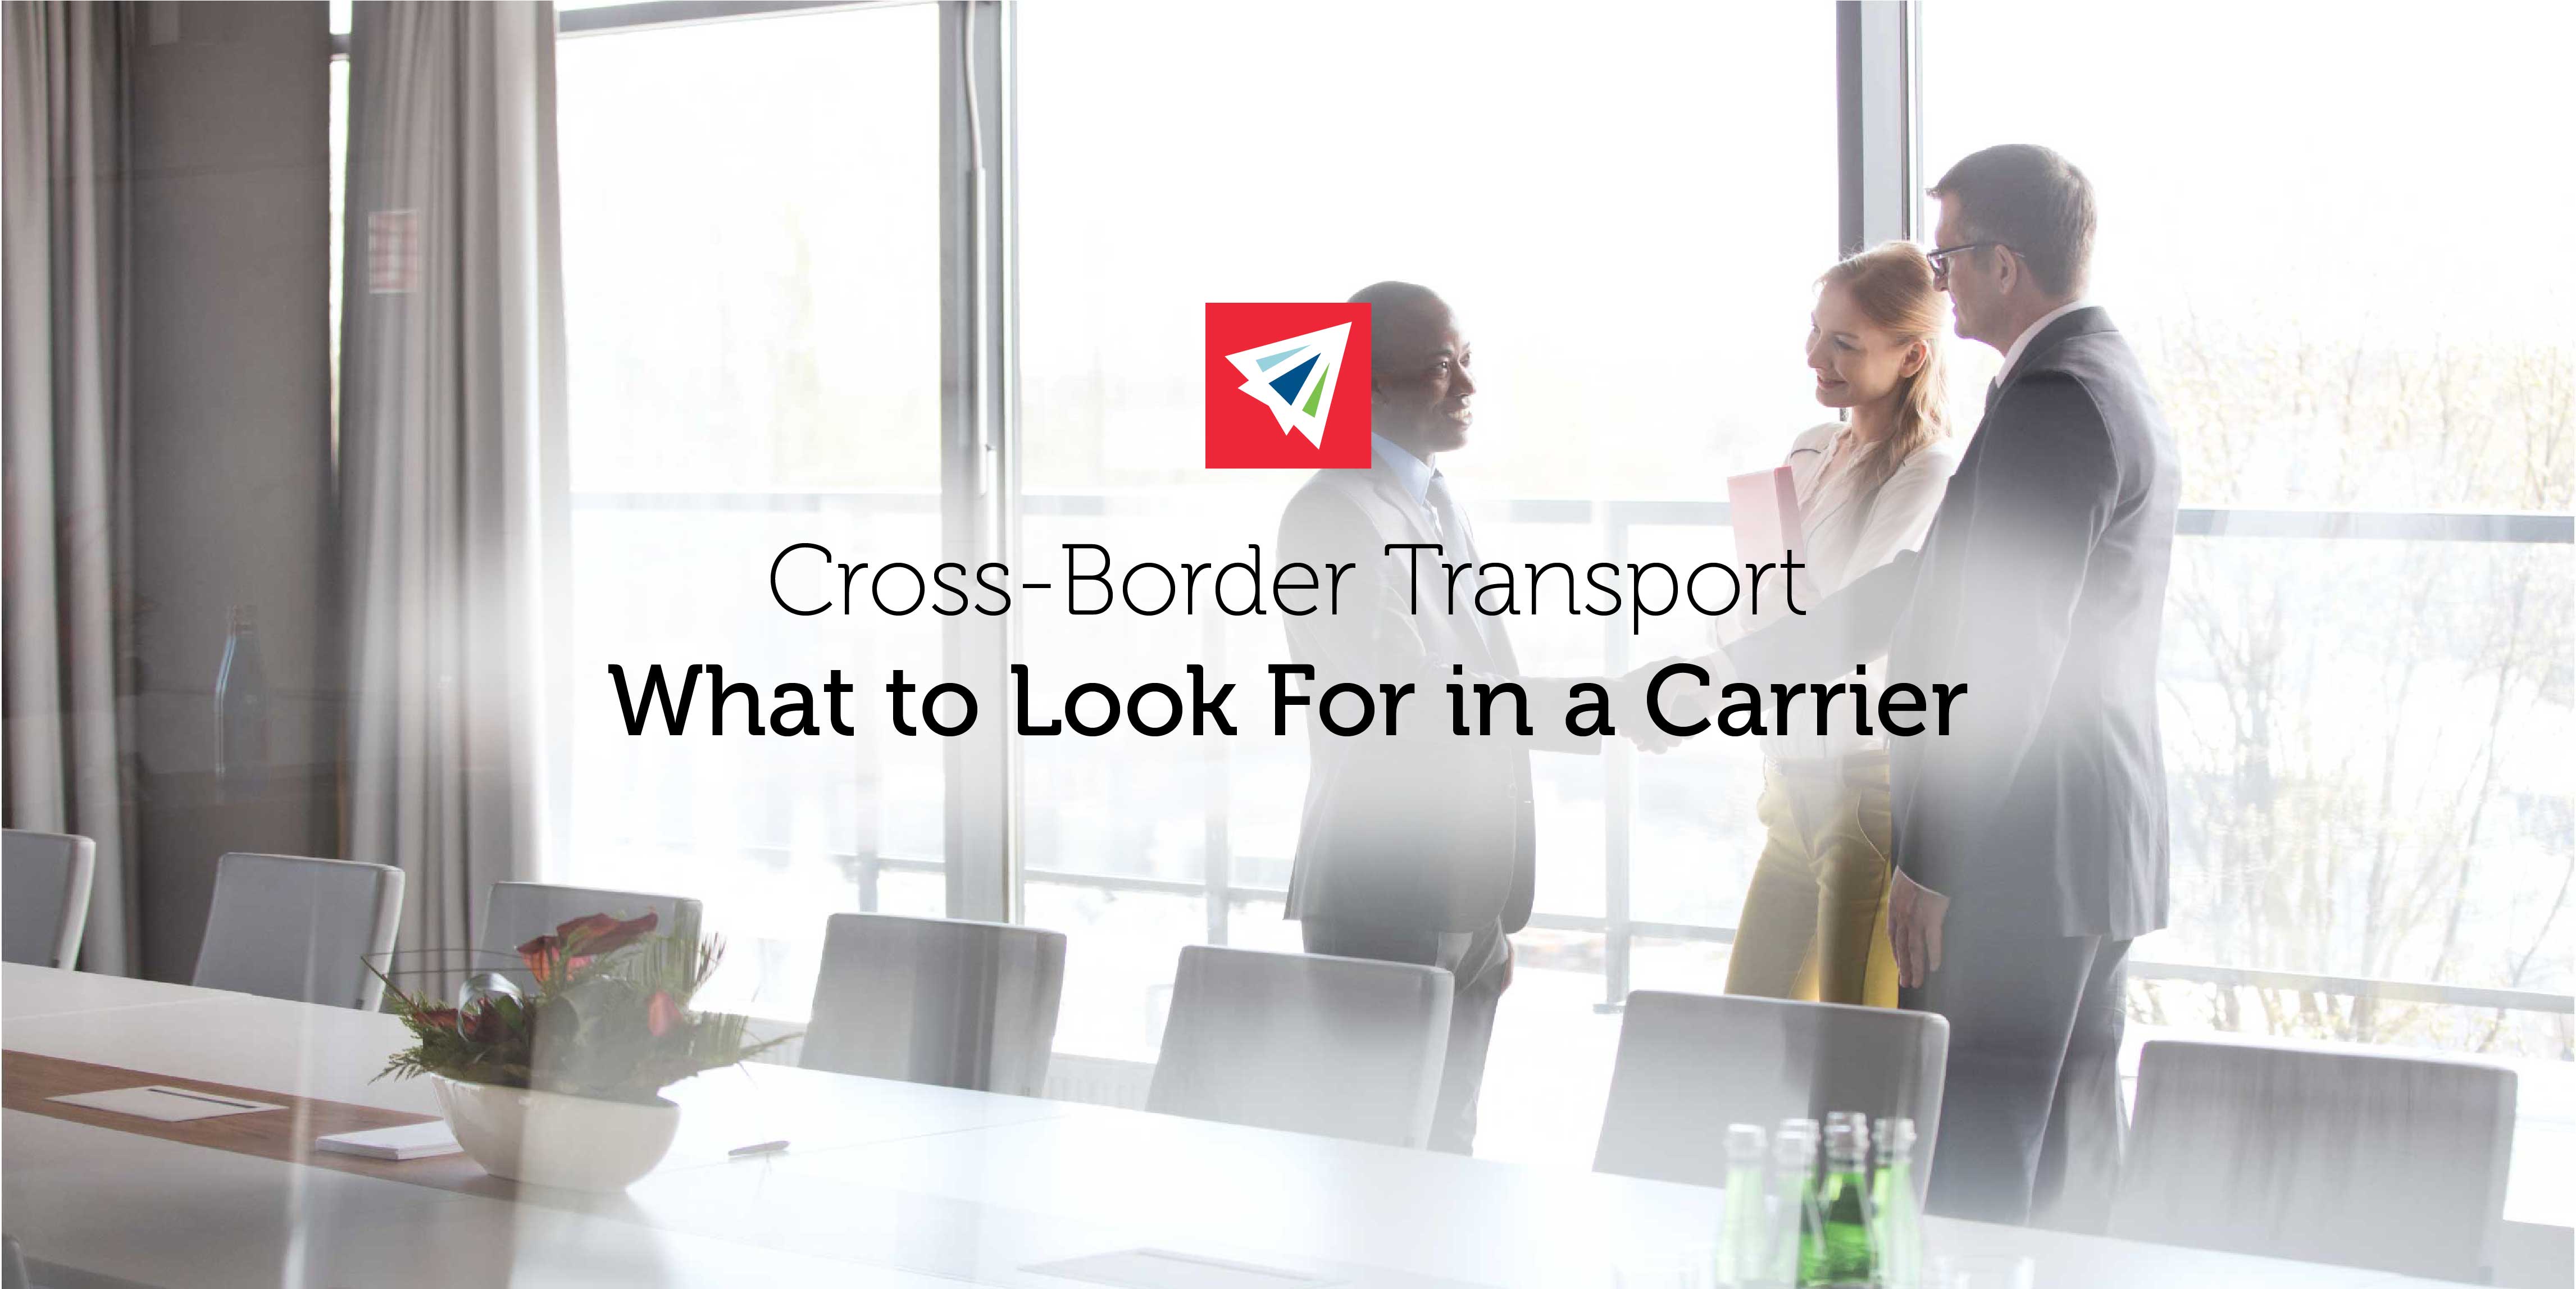 Cross-Border Transport - What to Look For in a Carrier